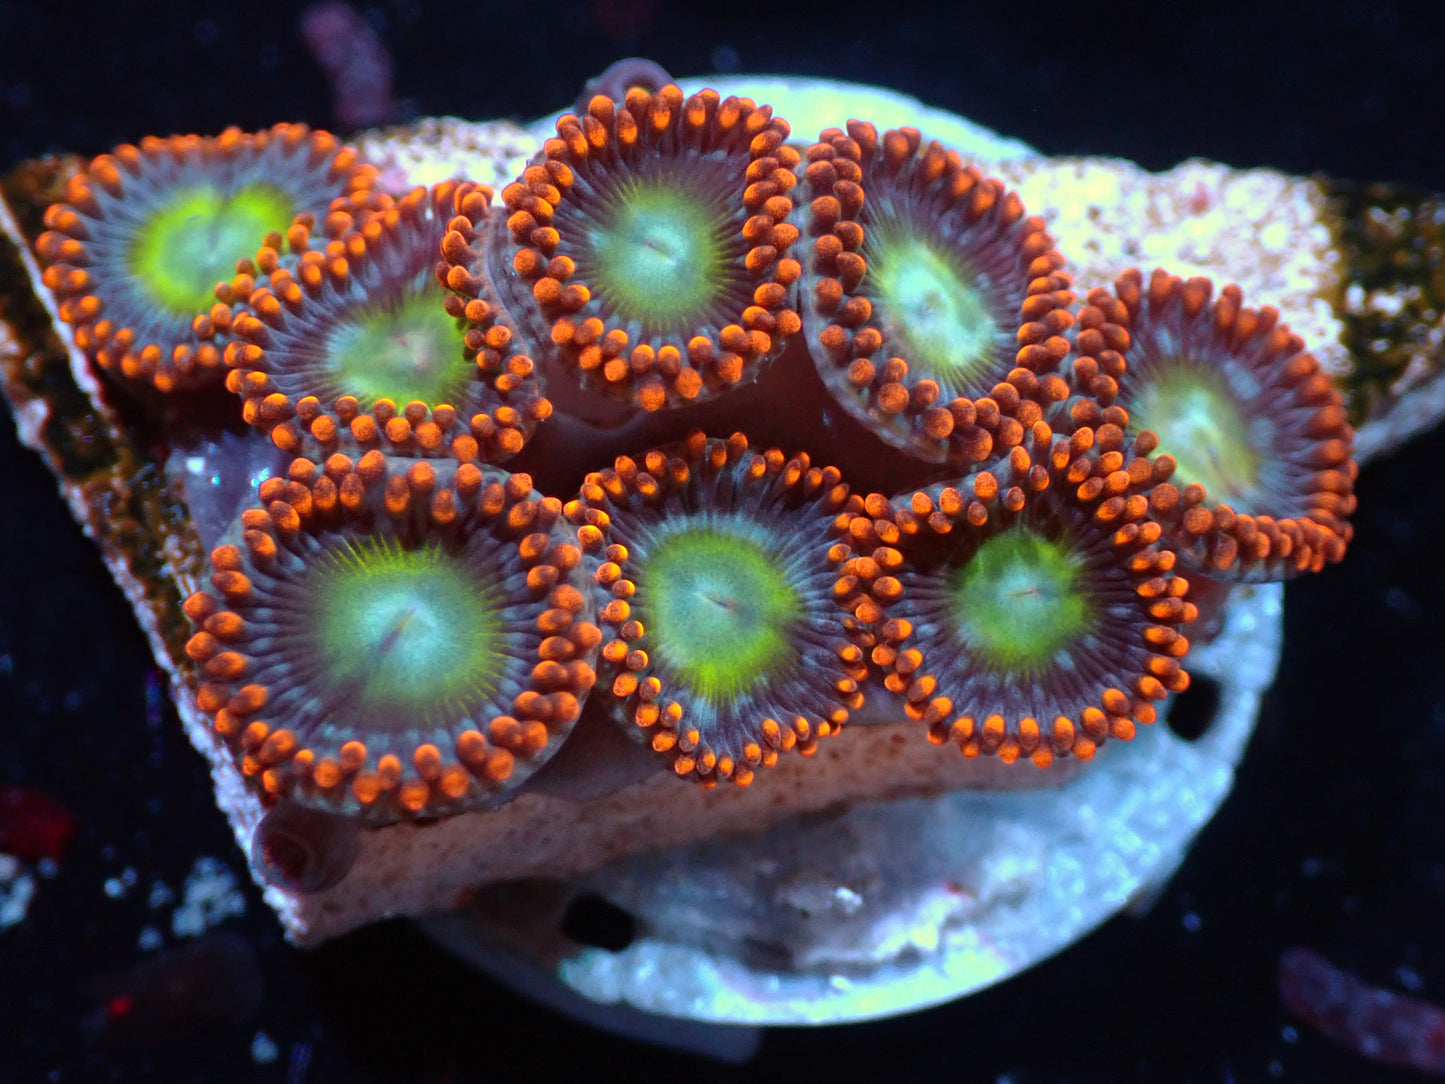 Circus Zoas Auctions 4/17 ended